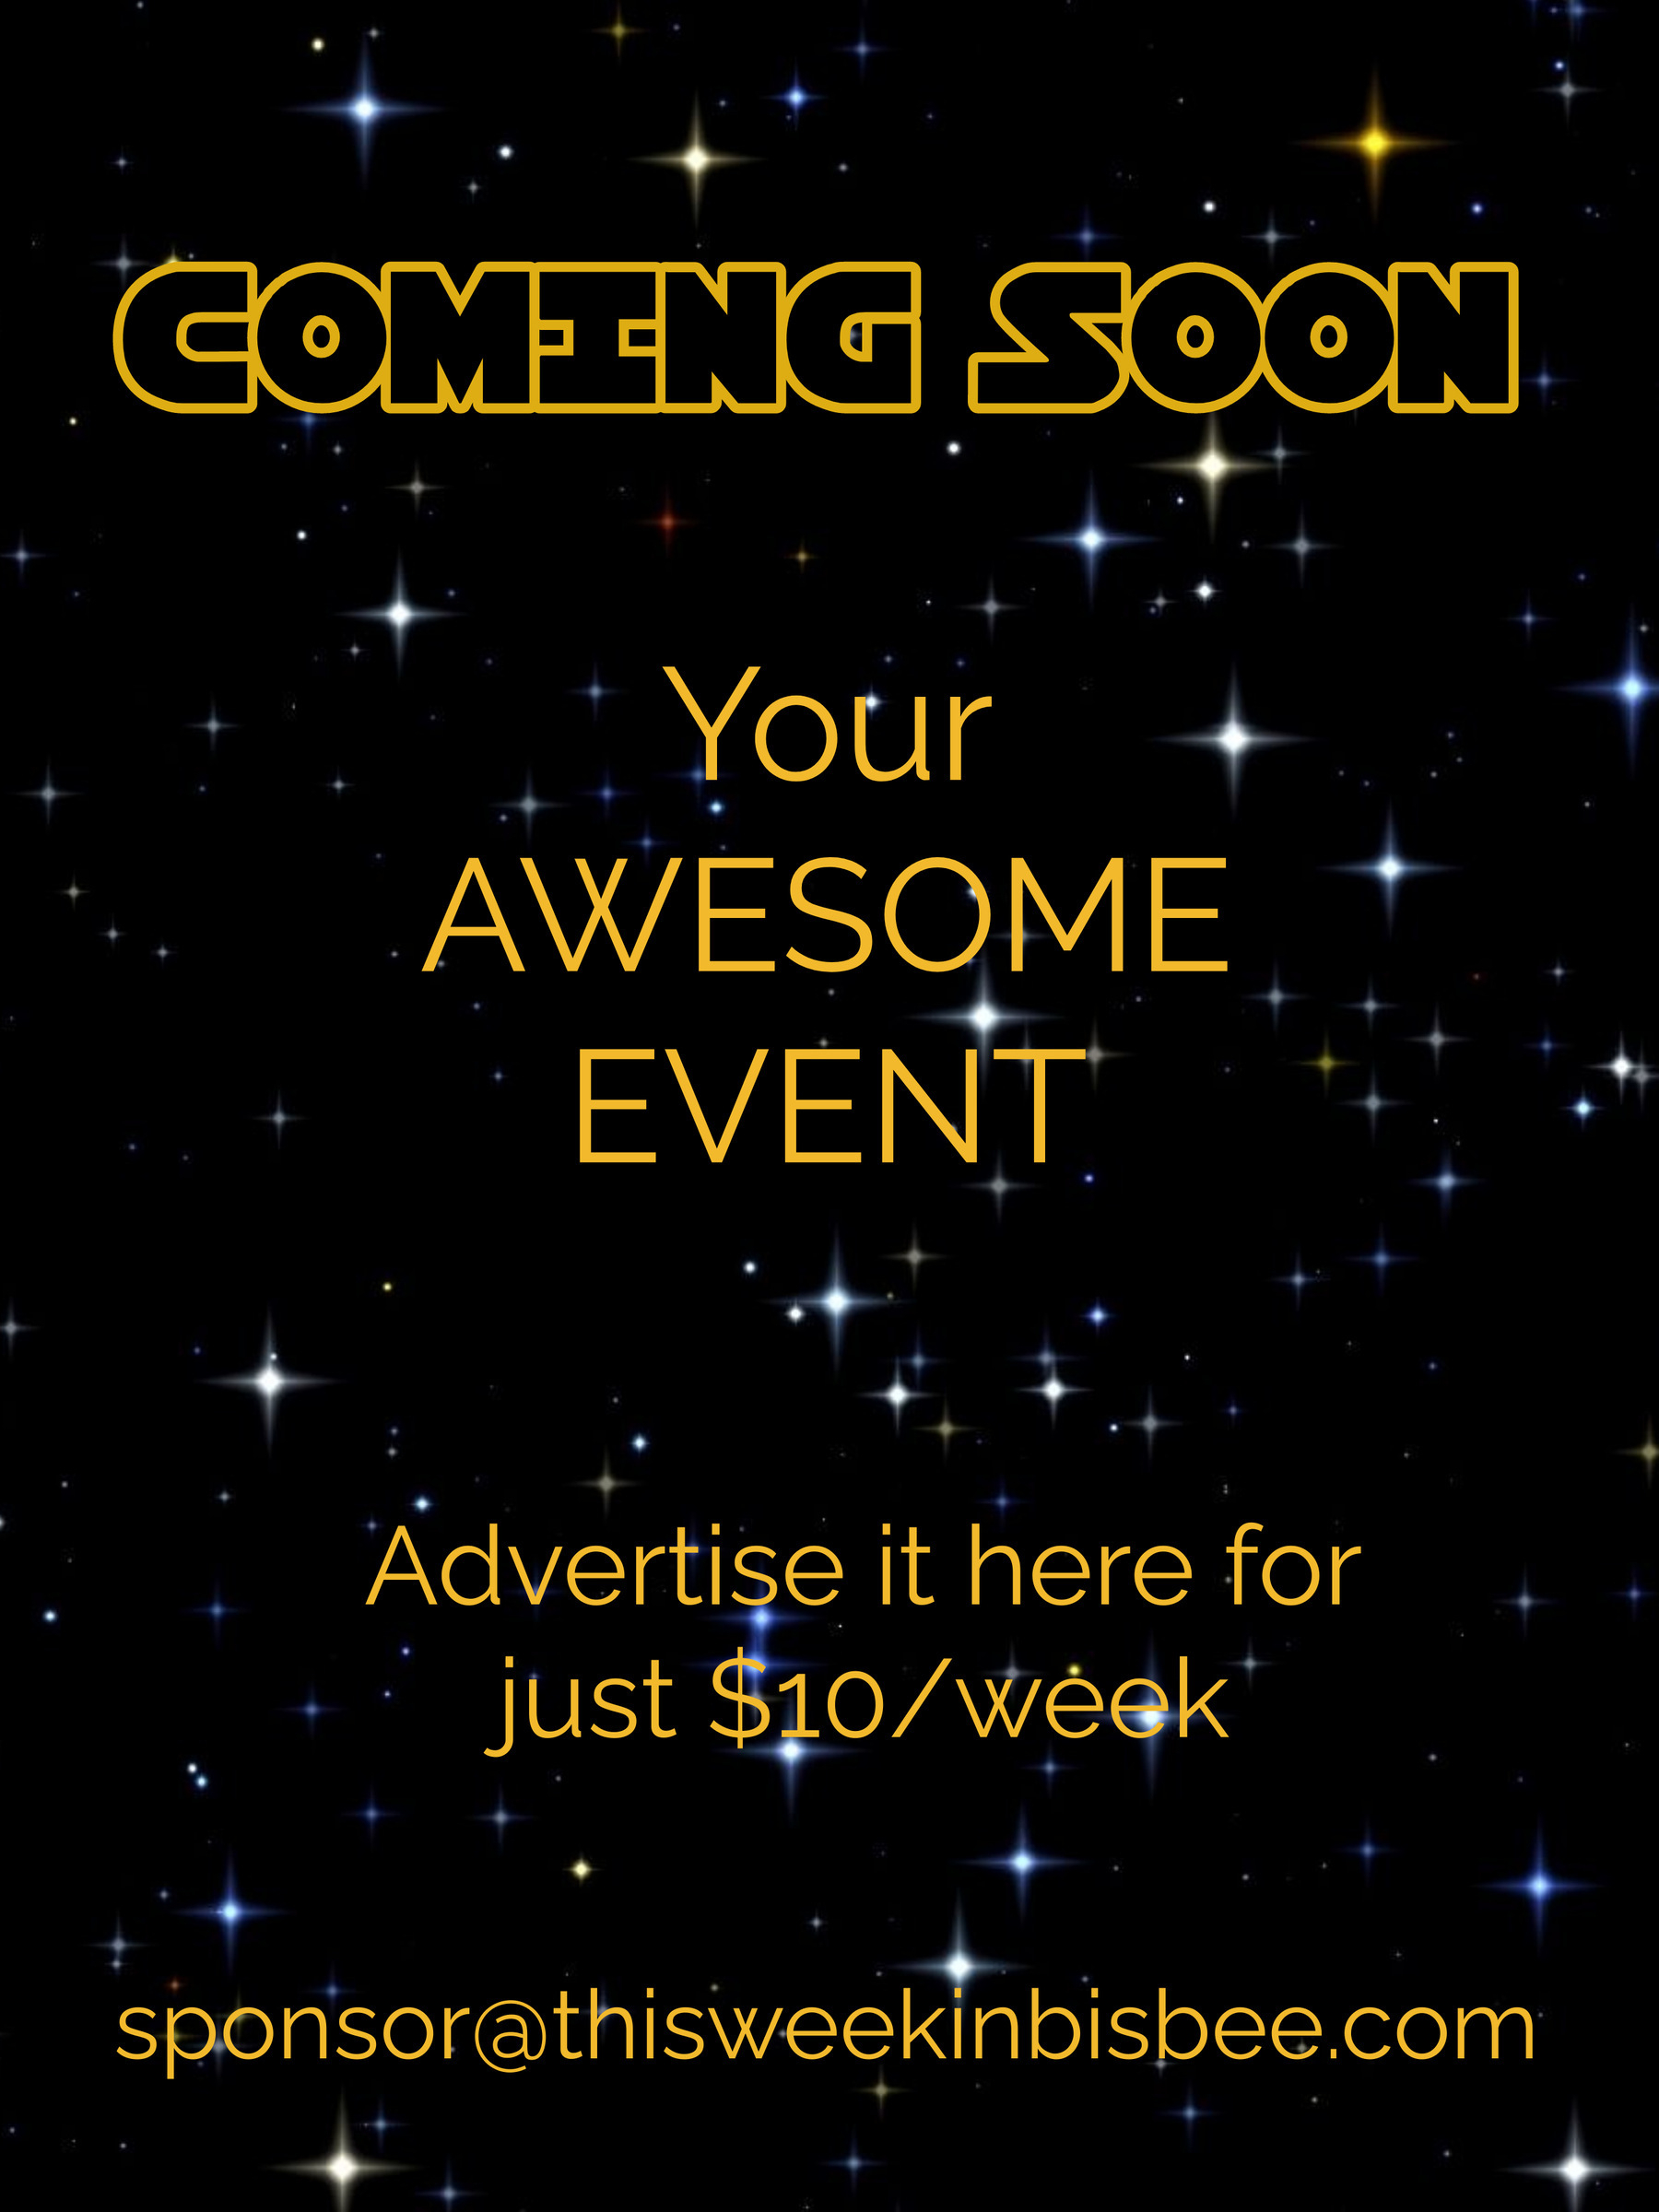 Coming soon: your awesome event! Advertise it here for $10/week sponsor@thisweekinbisbee.com